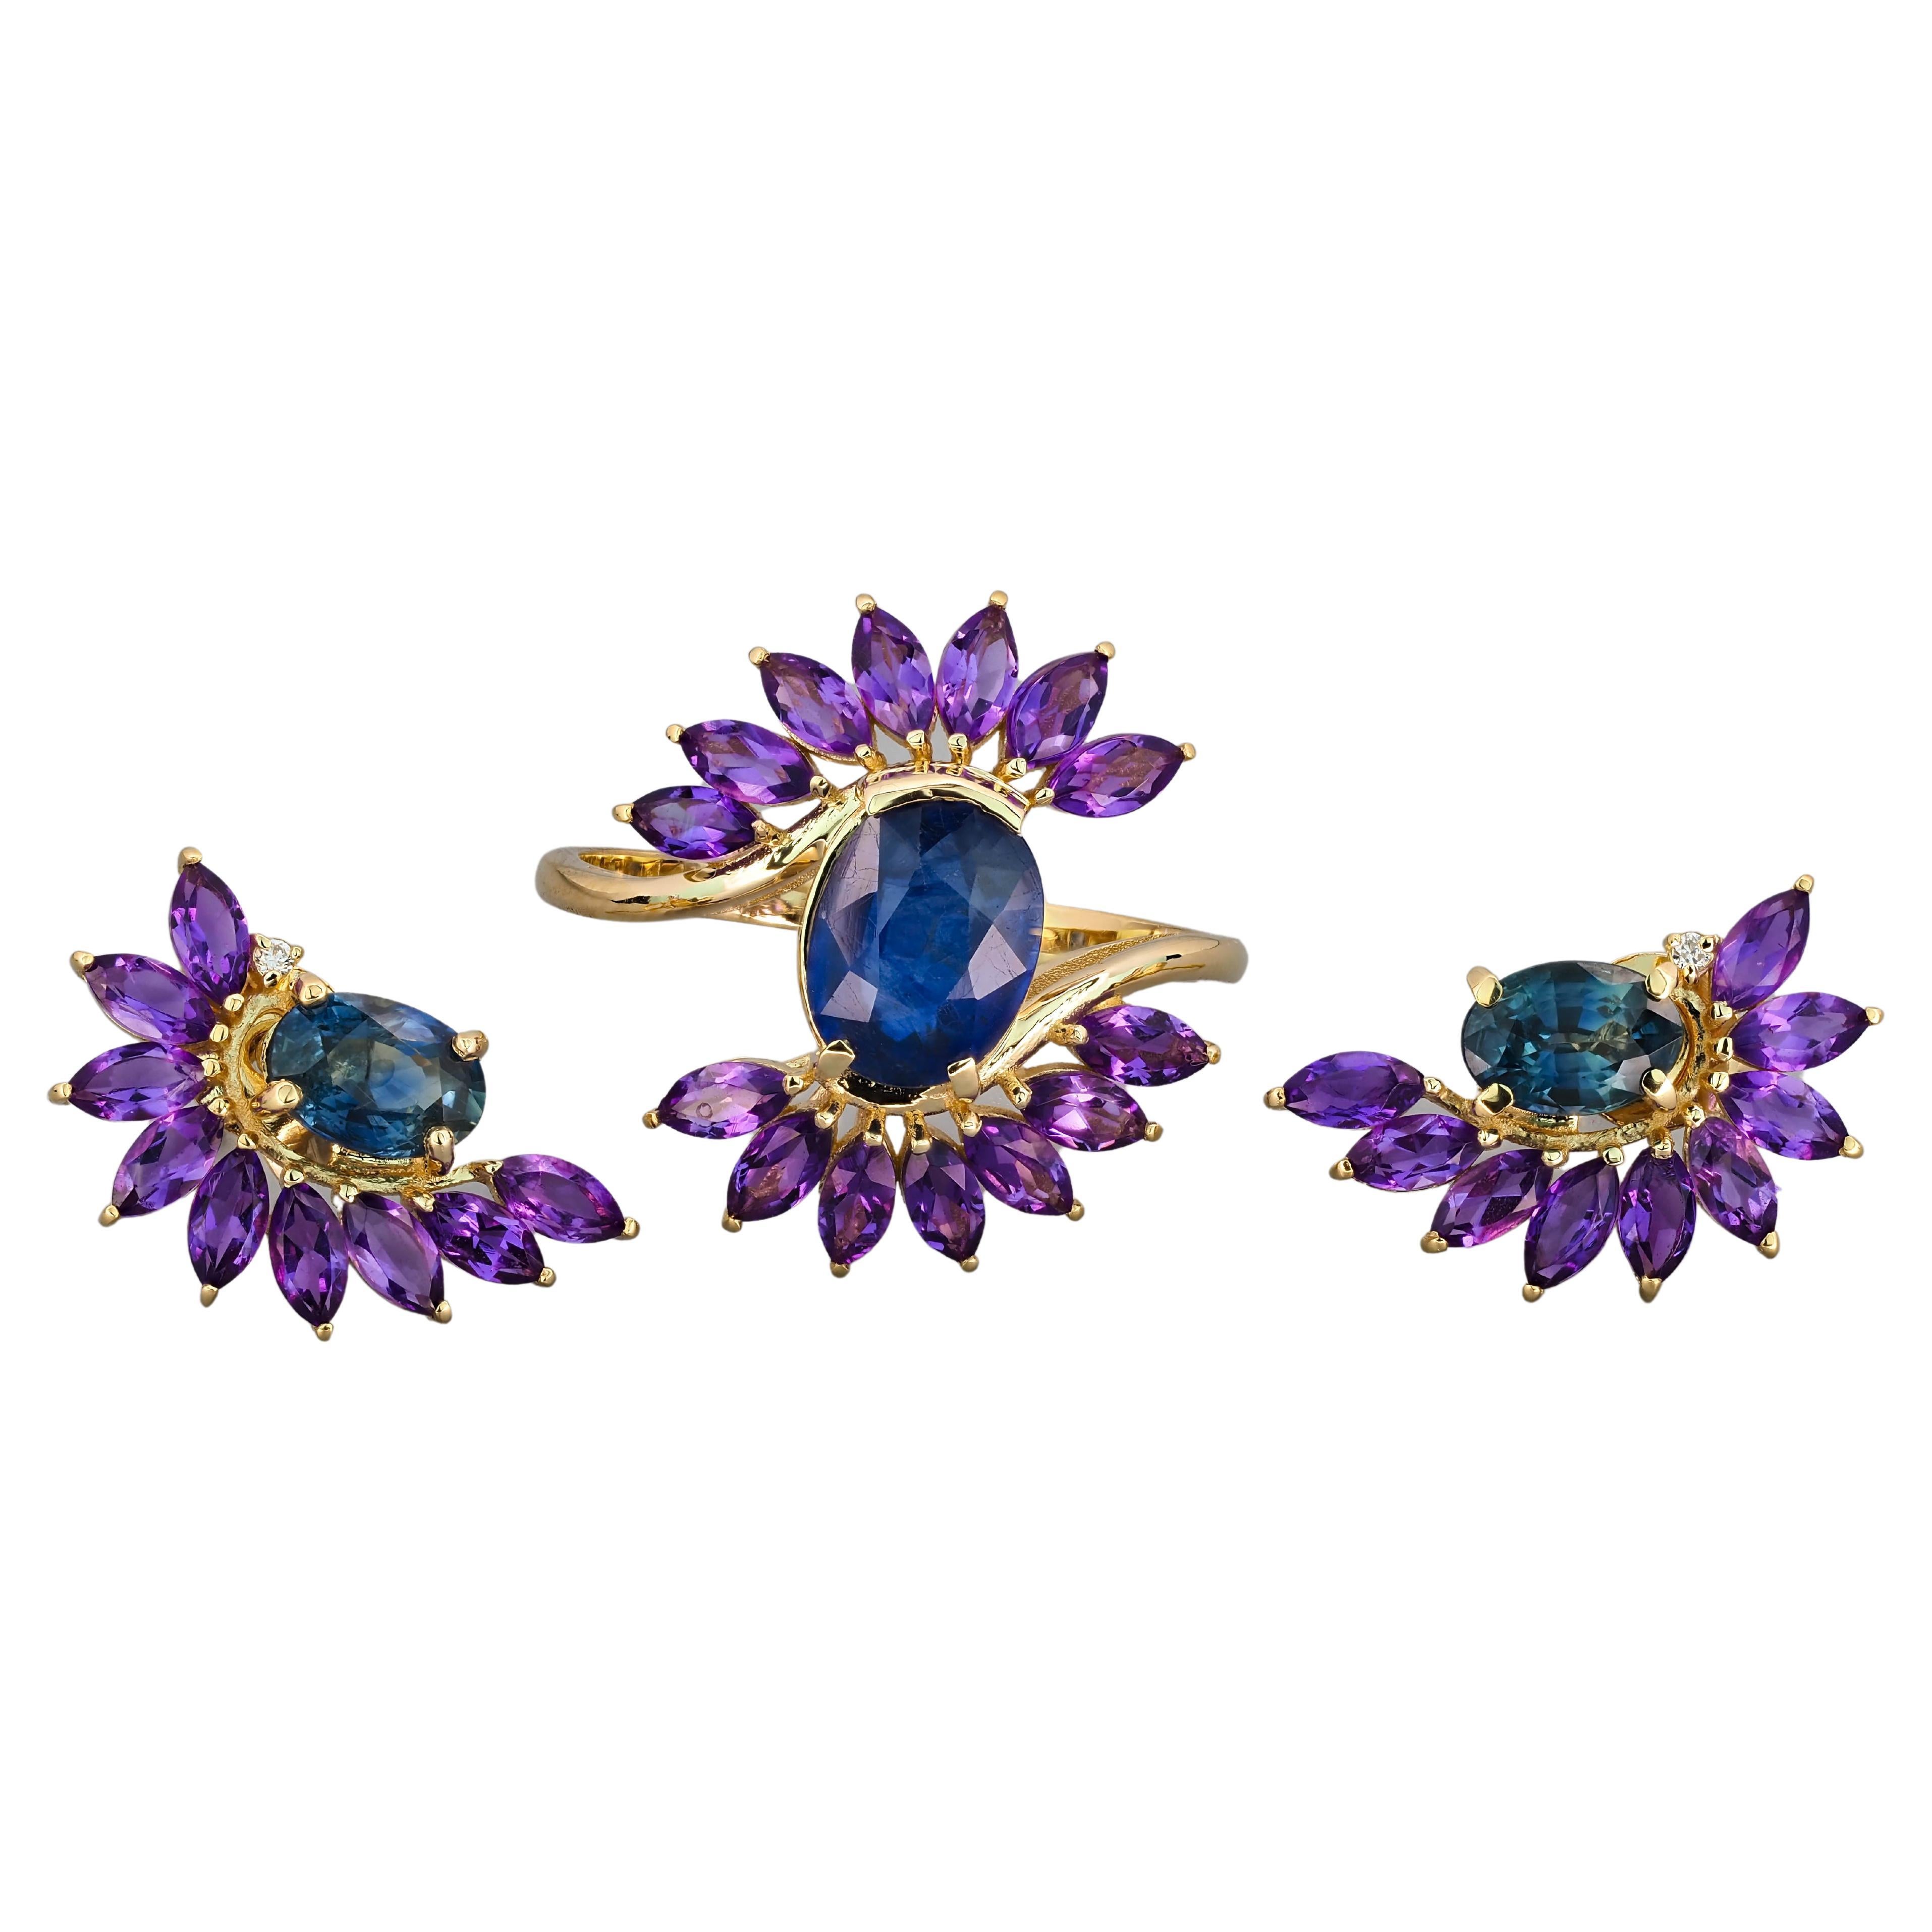 Sapphire and amethyst jewelry set: earrings and ring